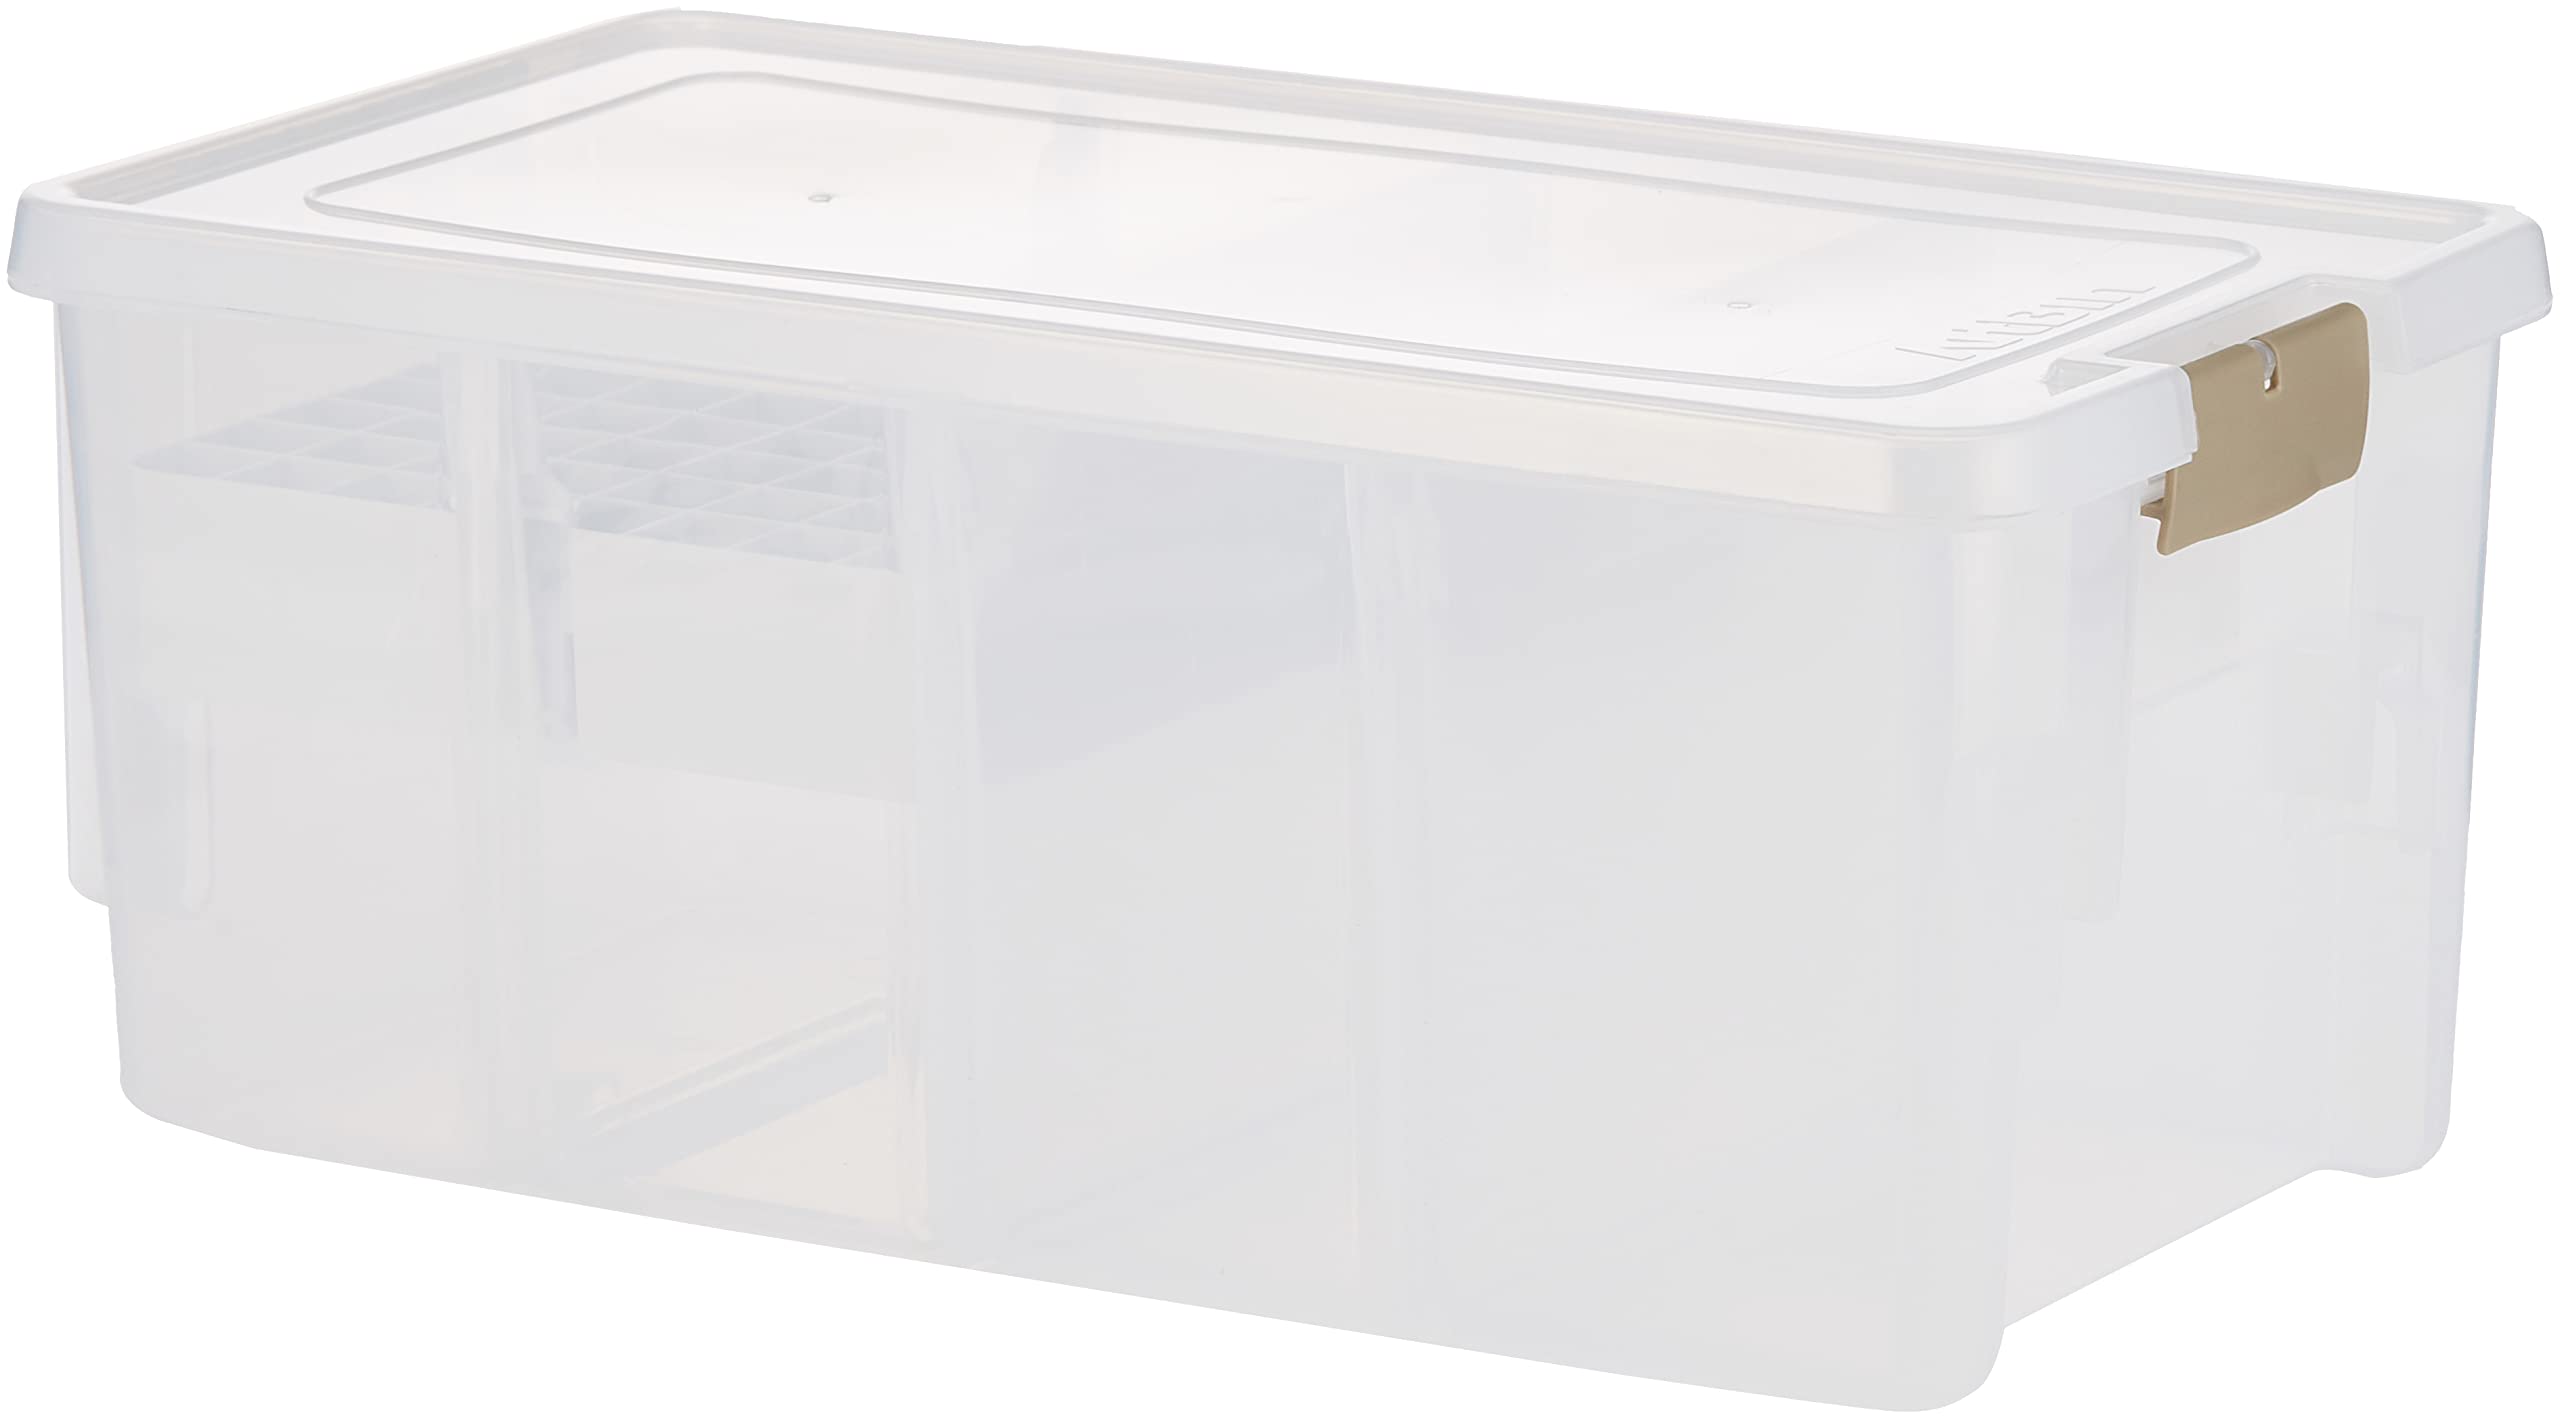 ArtBin 1-Tray Sketch Box with Top Compartment